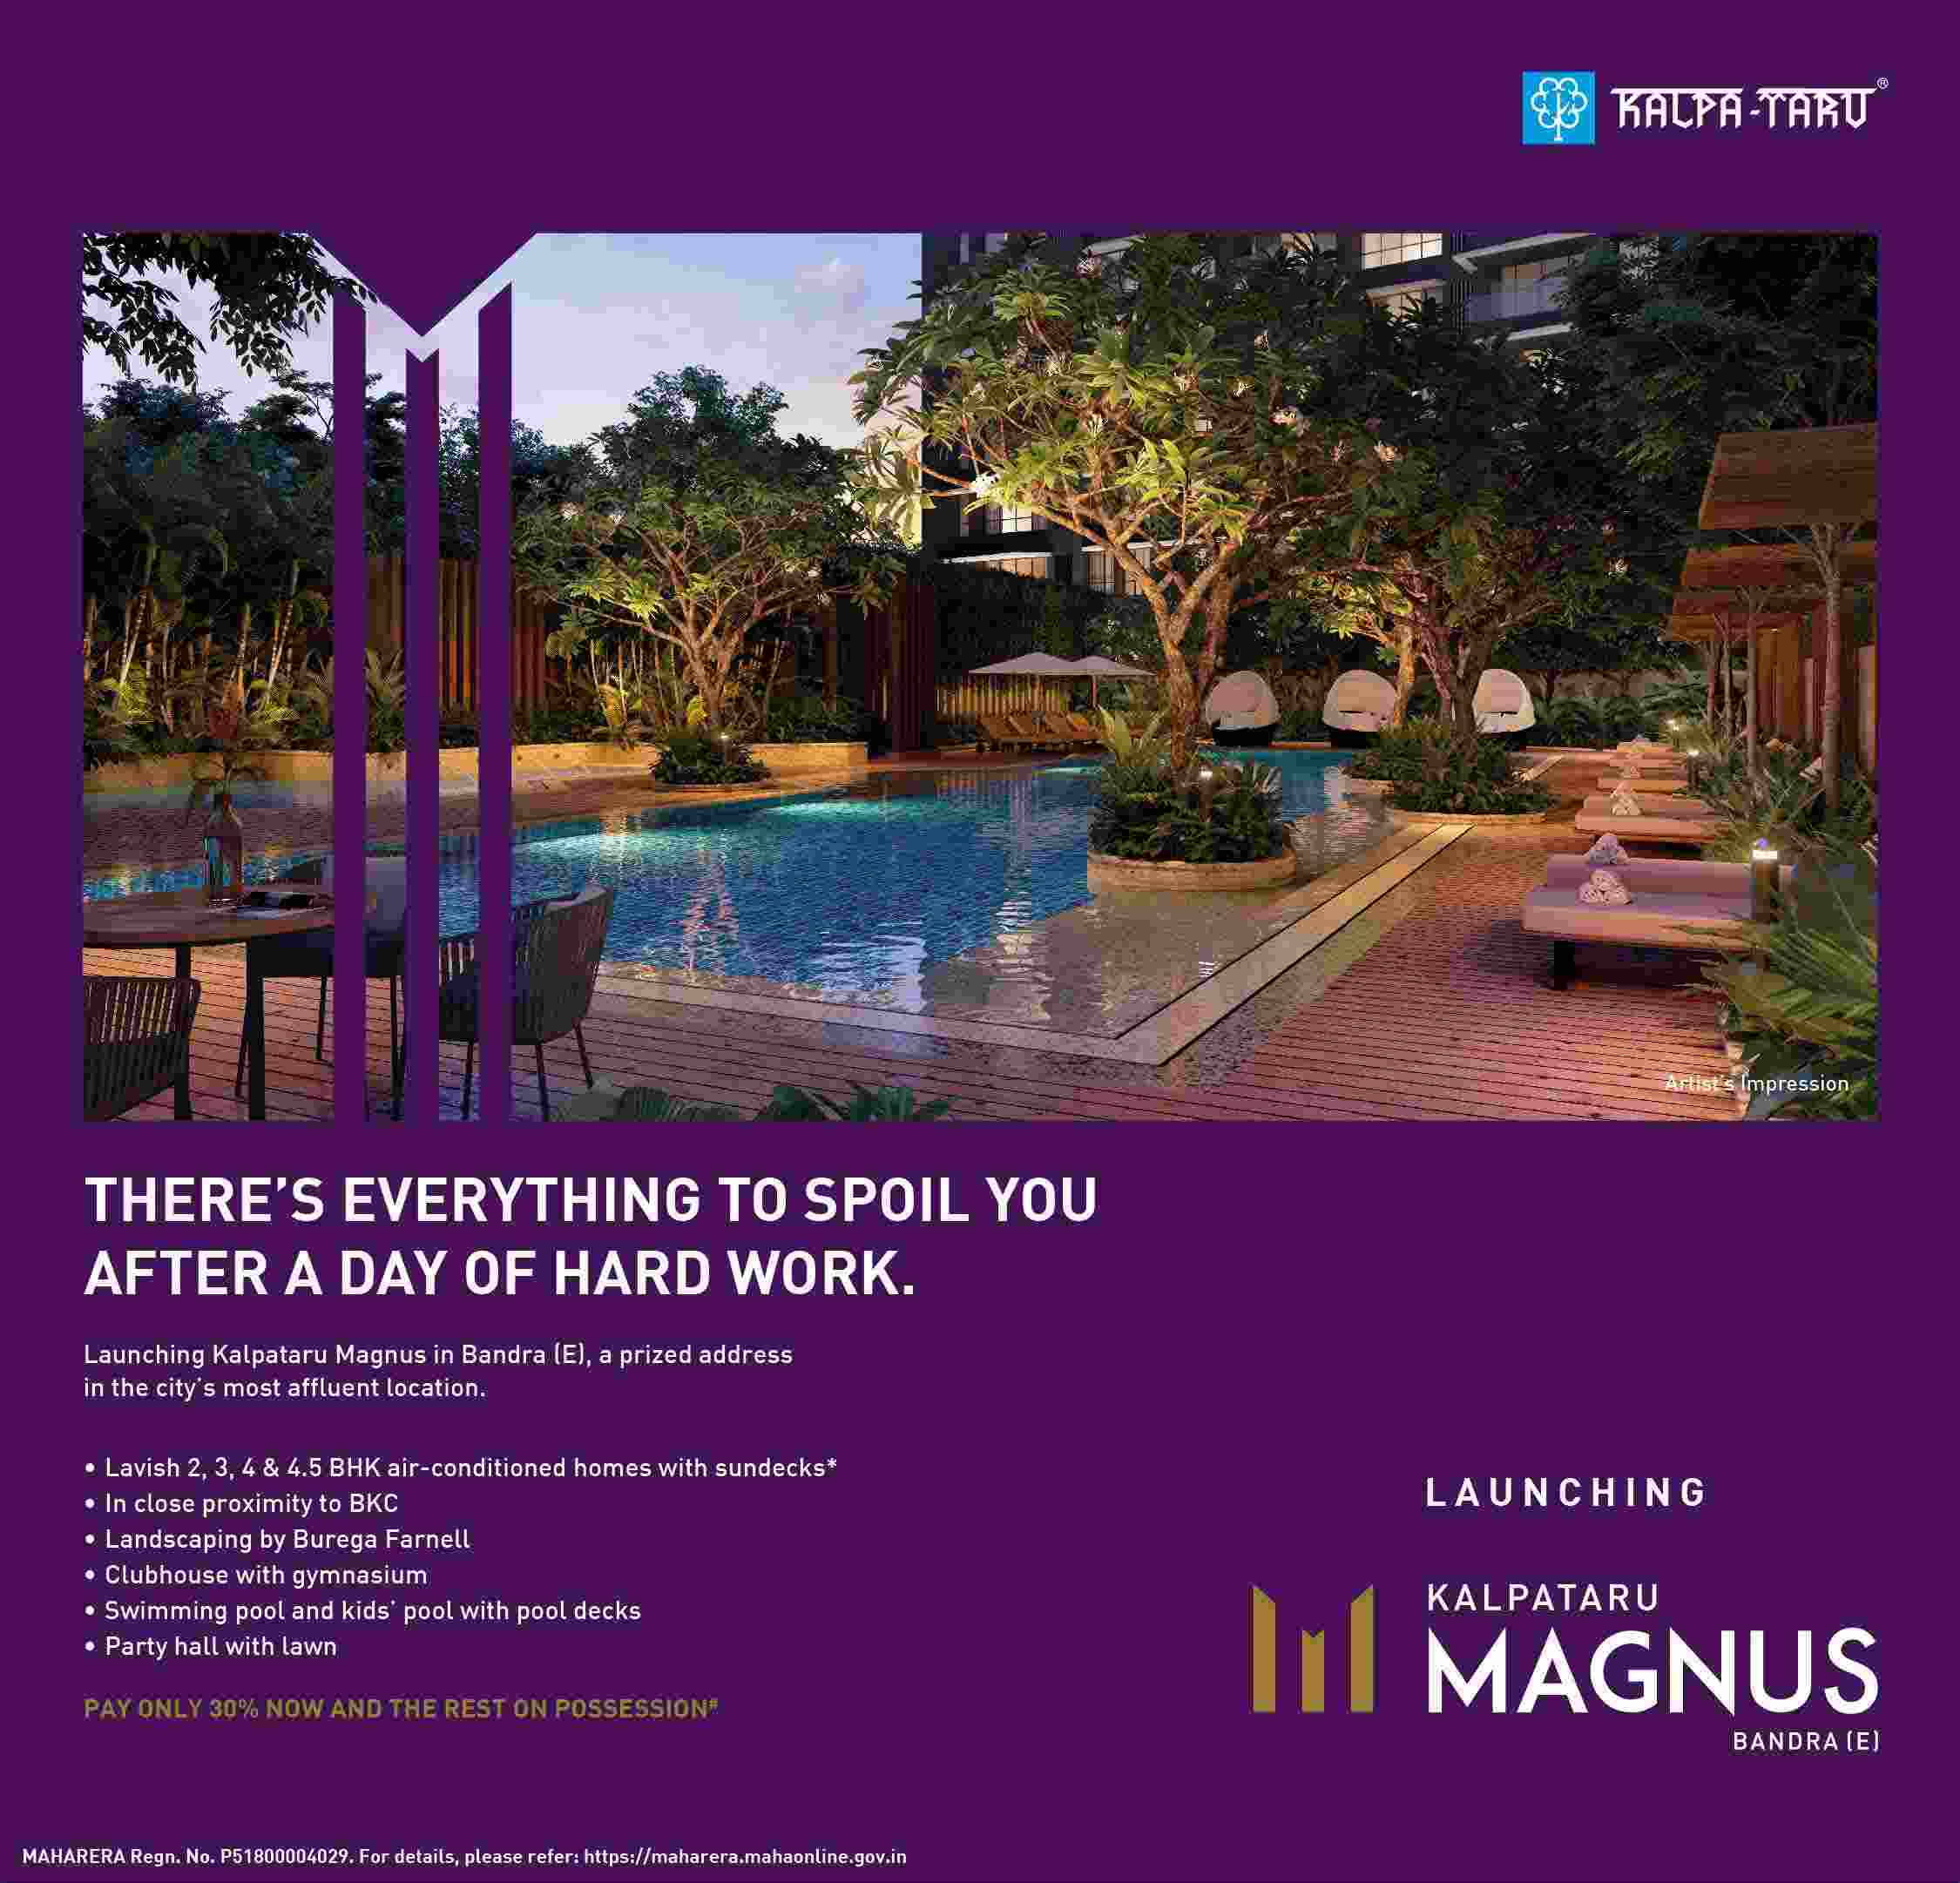 Pay only 30% now & rest on possession at Kalpataru Magnus in Mumbai